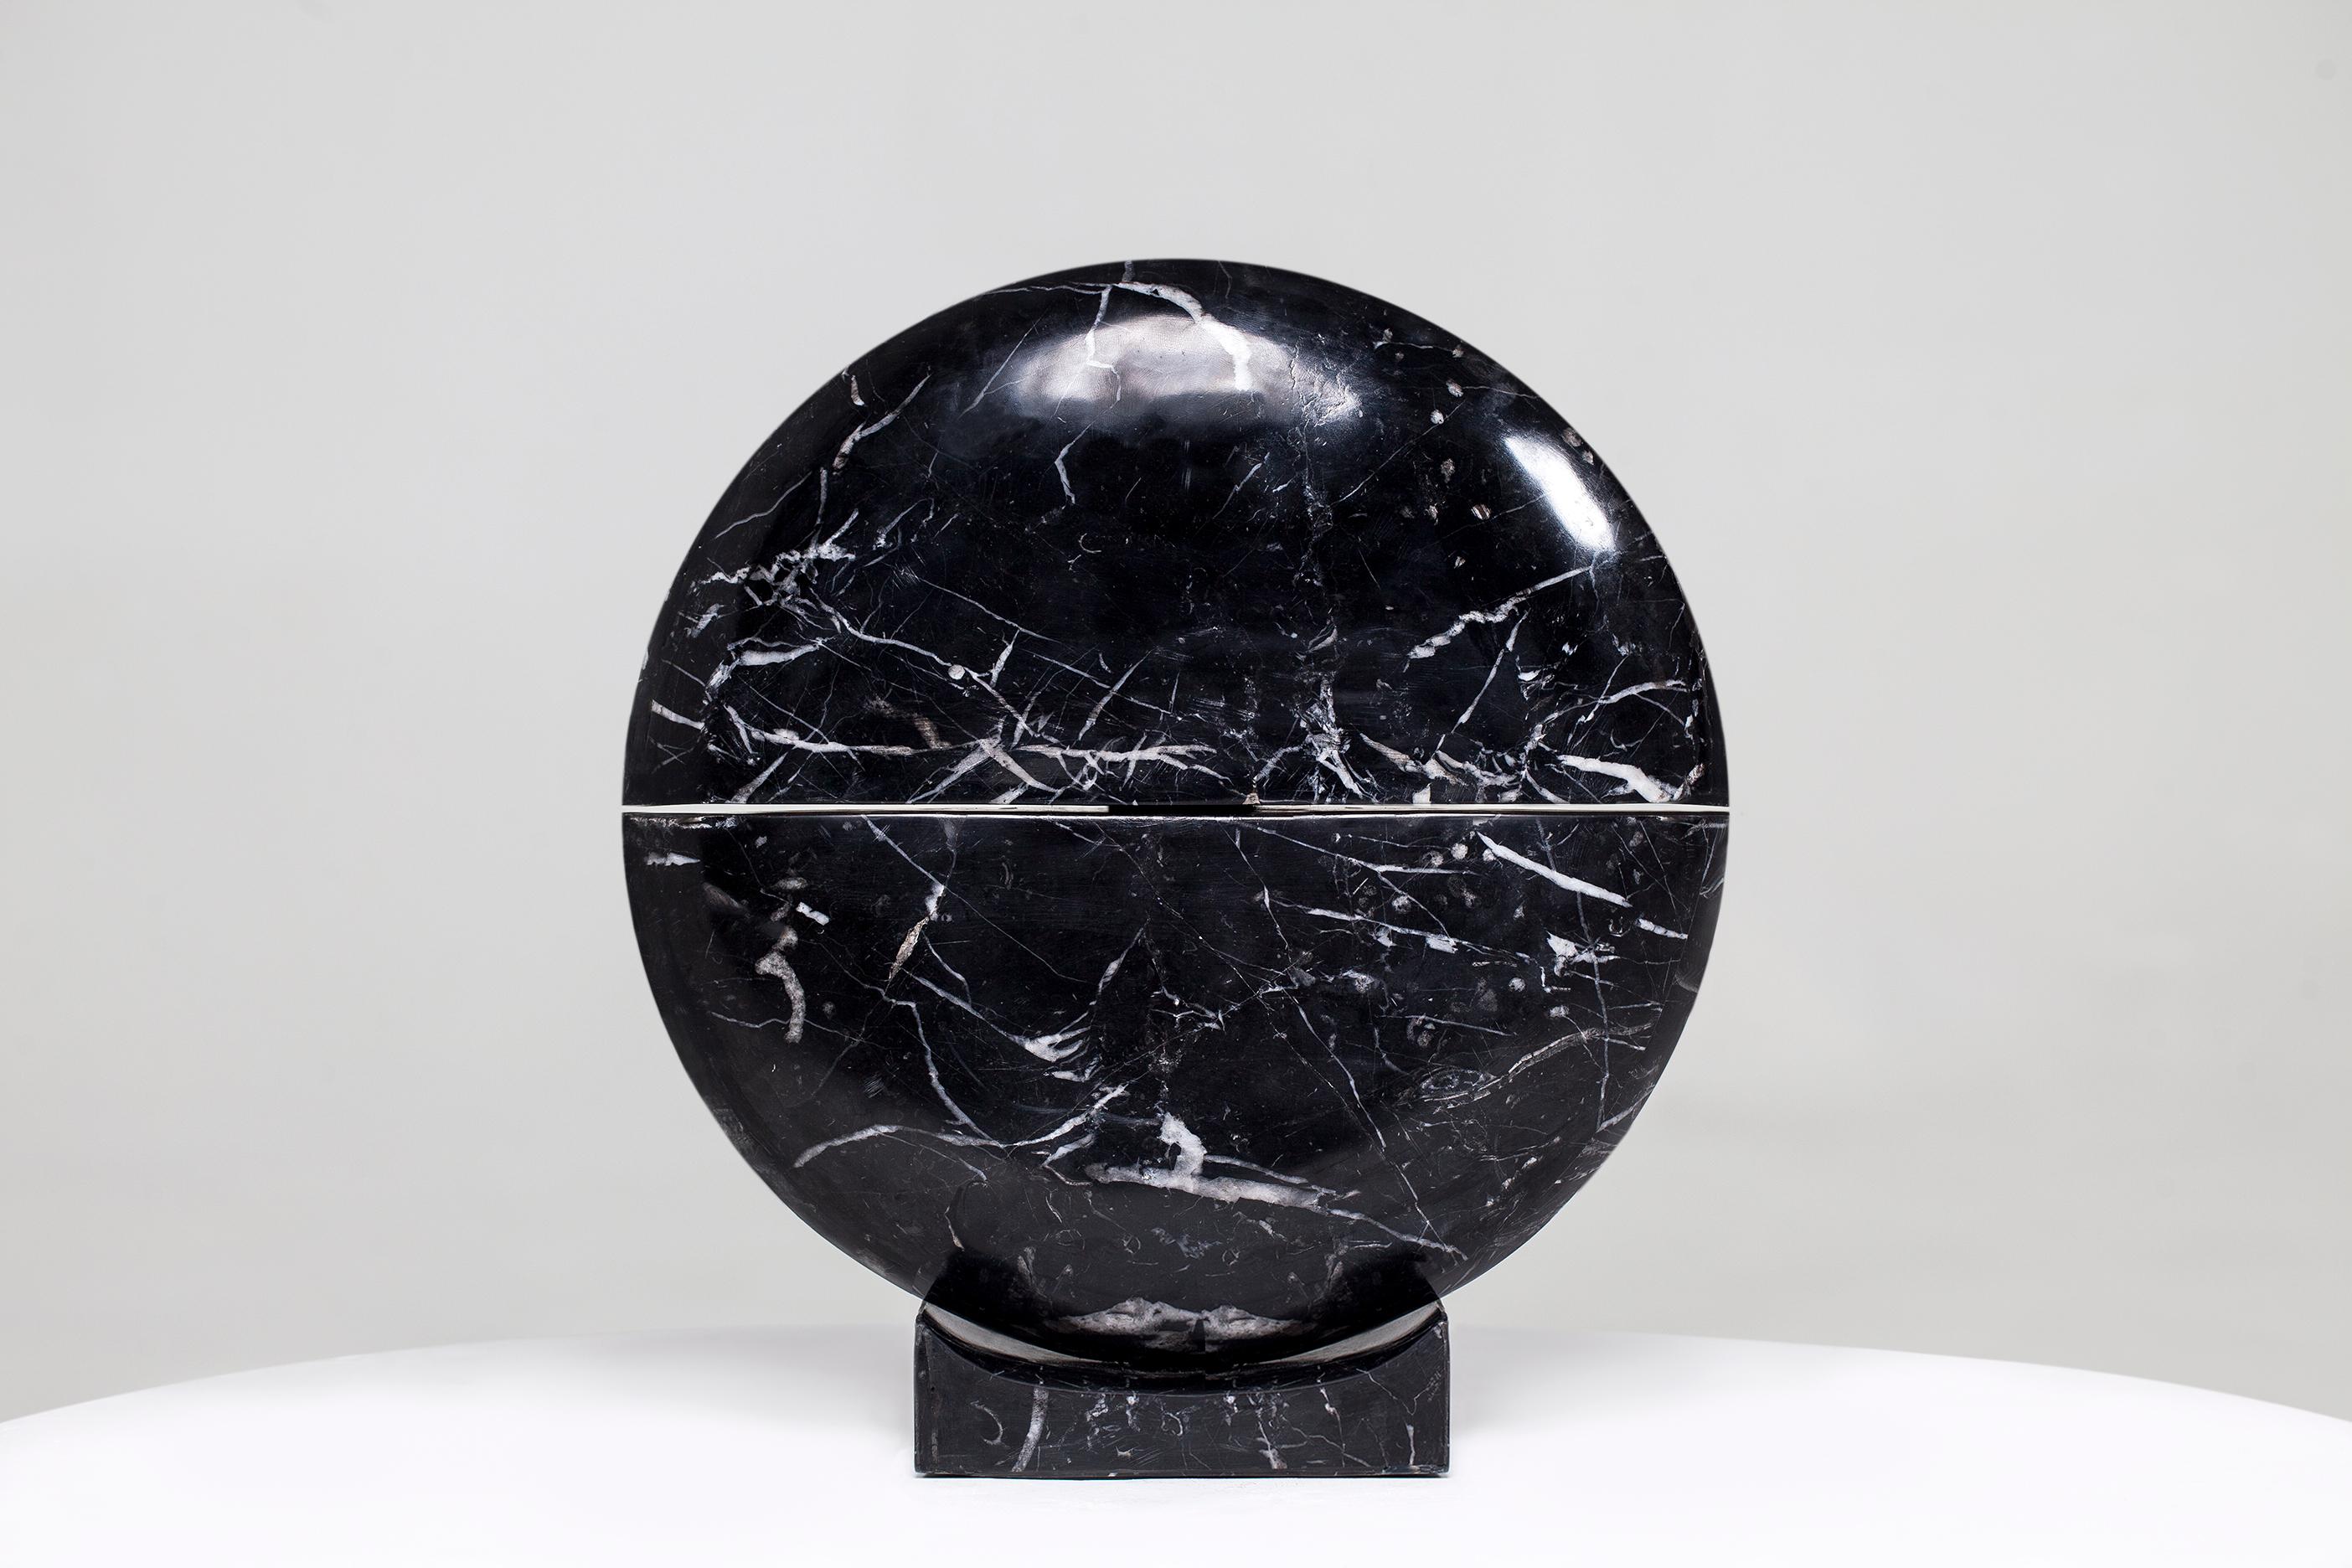 Core marble table lamp by Carlos Aucejo
Dimensions: 56 x 54 x 9 cm
Materials: Marquina marble

Core lamp 
This piece is made of Marquina marble. The composition comes from the idea of a growing nucleus. It has been developed through the philosophy